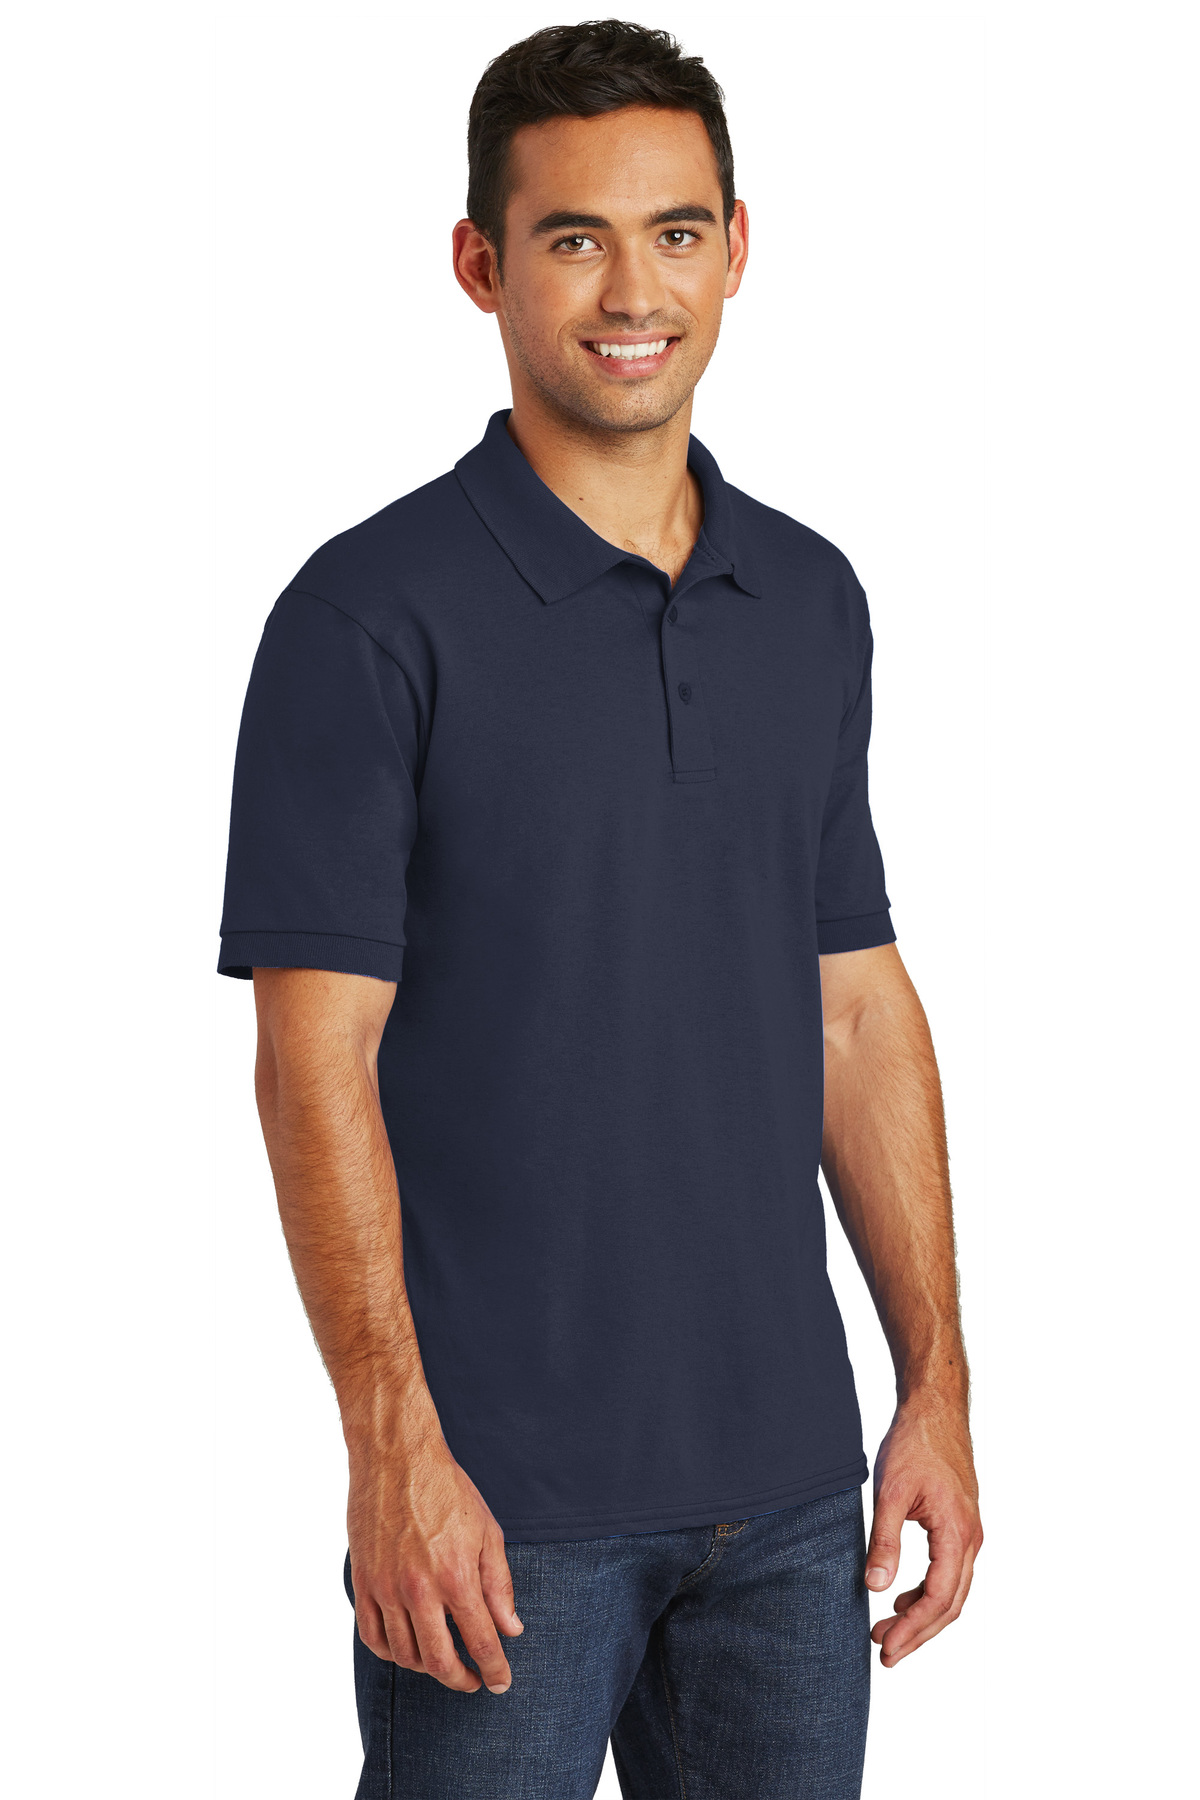 Port & Company Core Blend Jersey Knit Polo | Product | Company Casuals